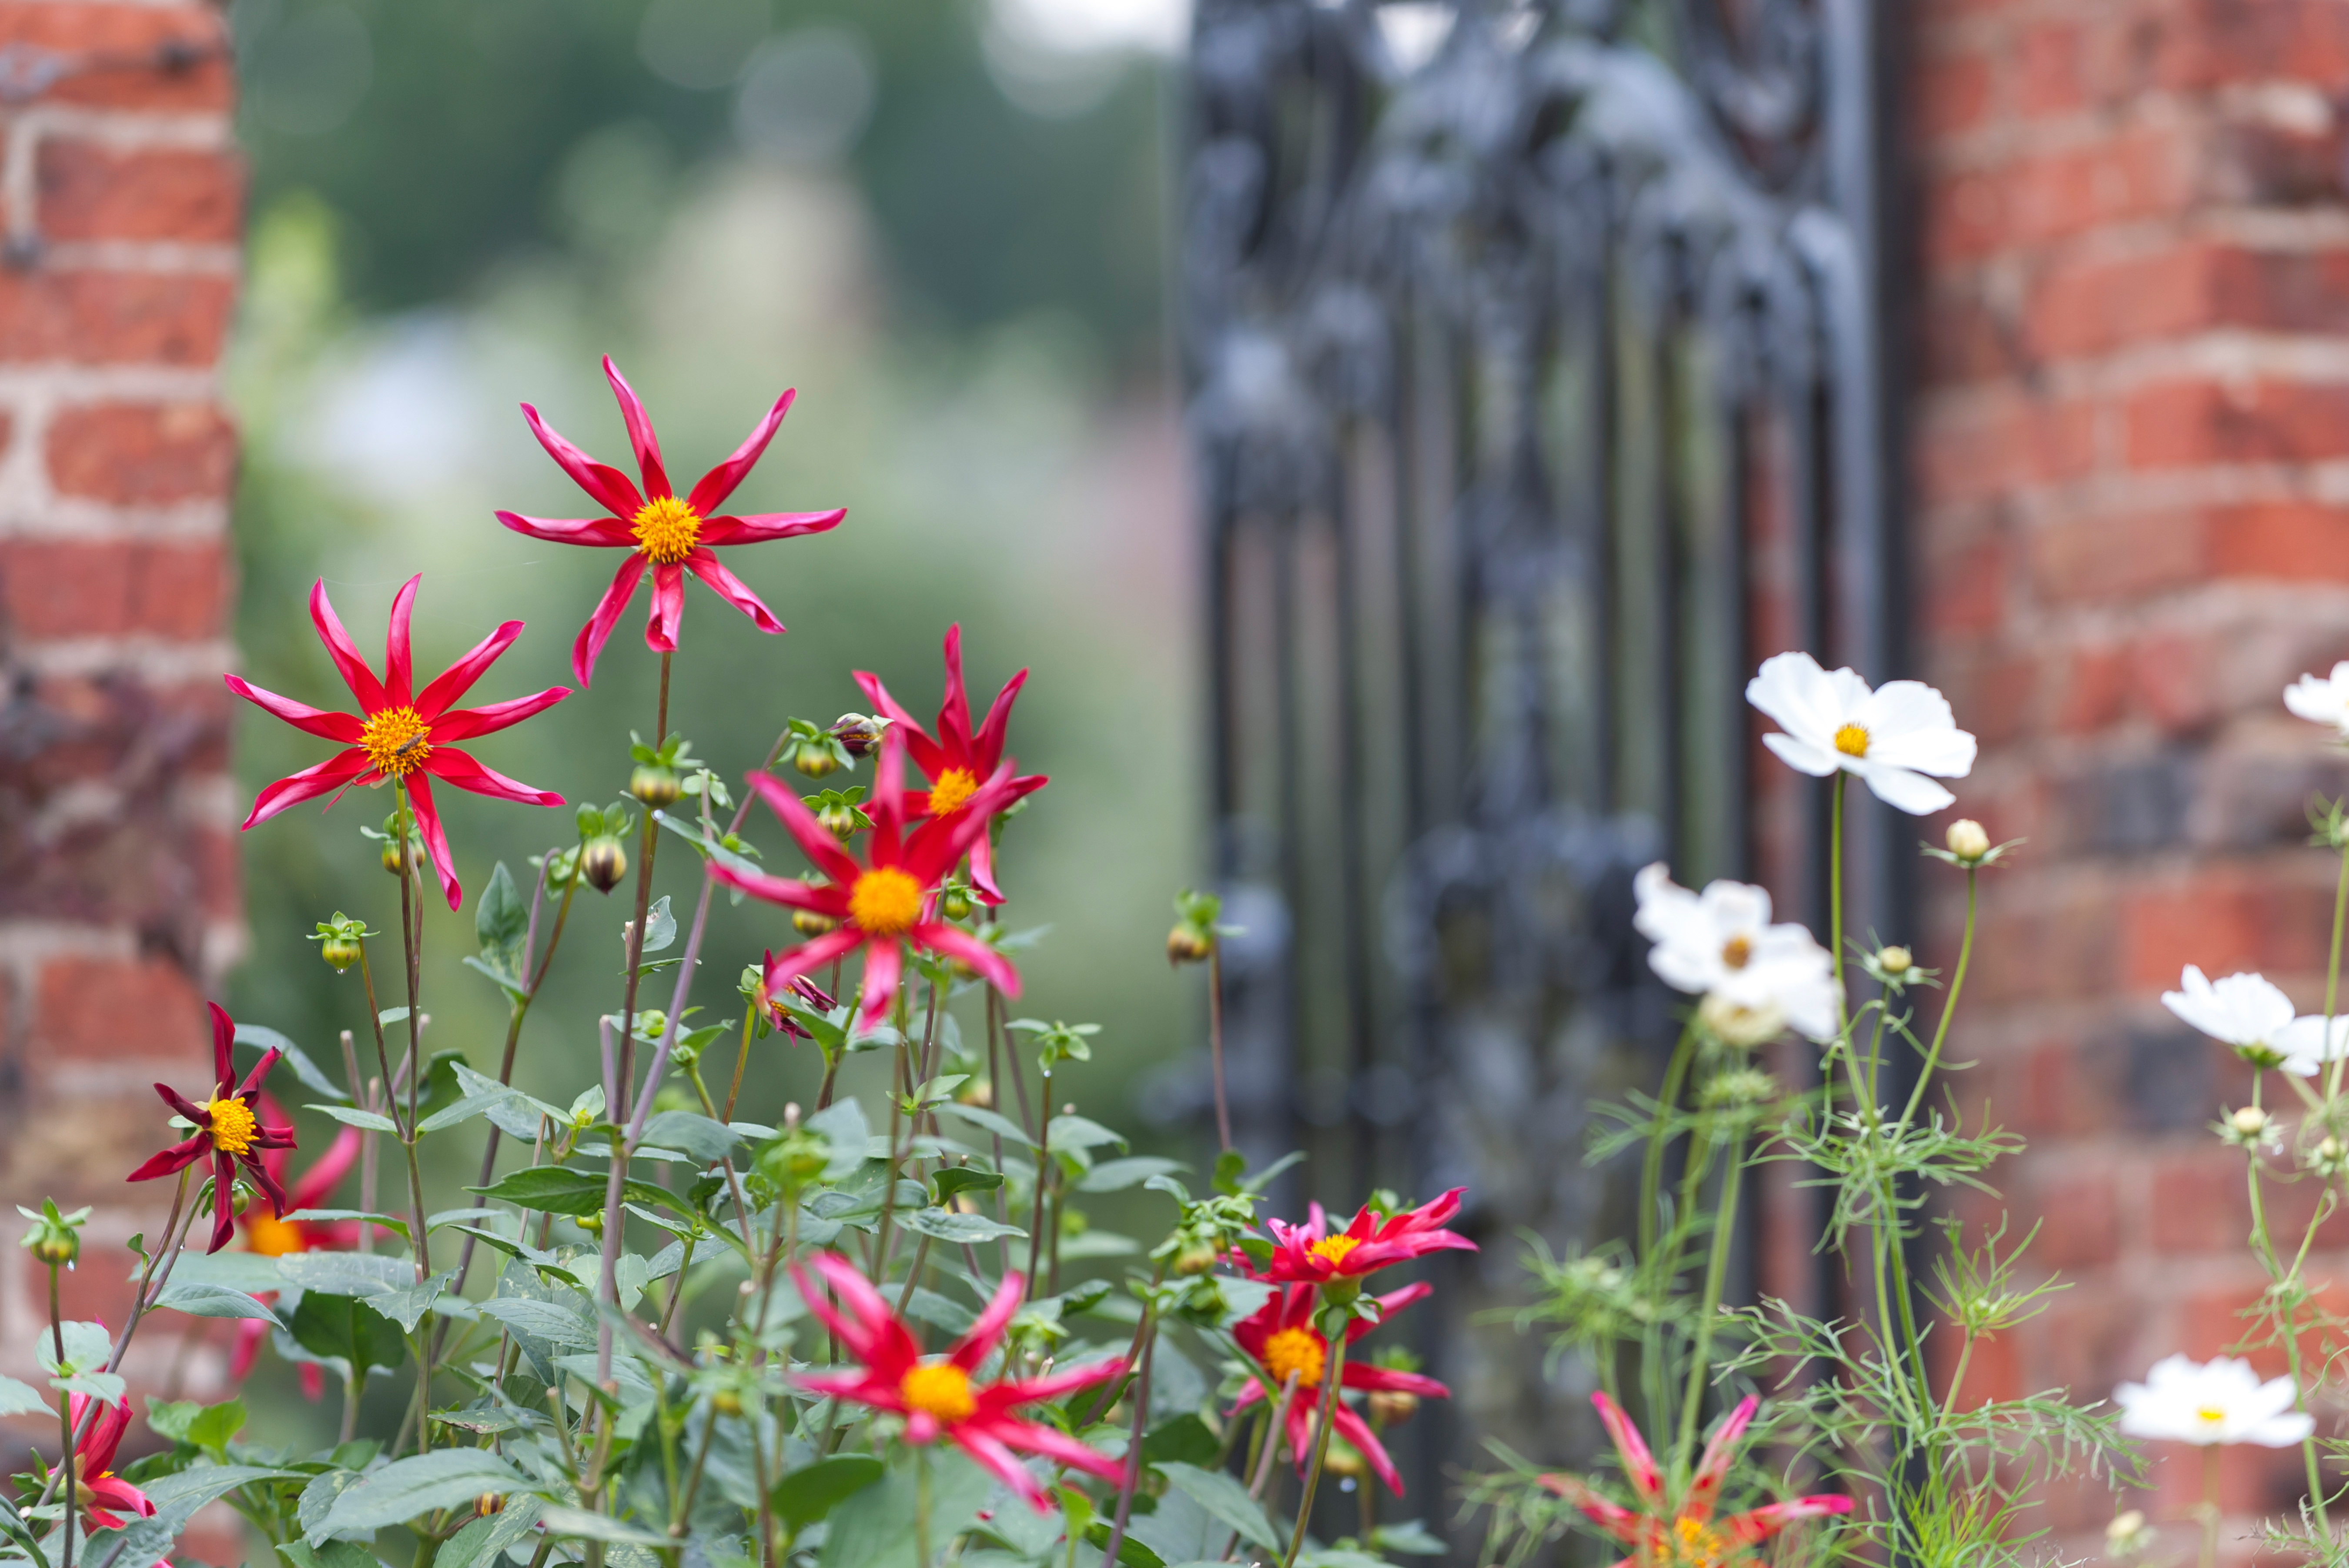 Dahlia 'Honka Red' in the gardens at Beningbrough (Paul Harris/National Trust Images/PA)